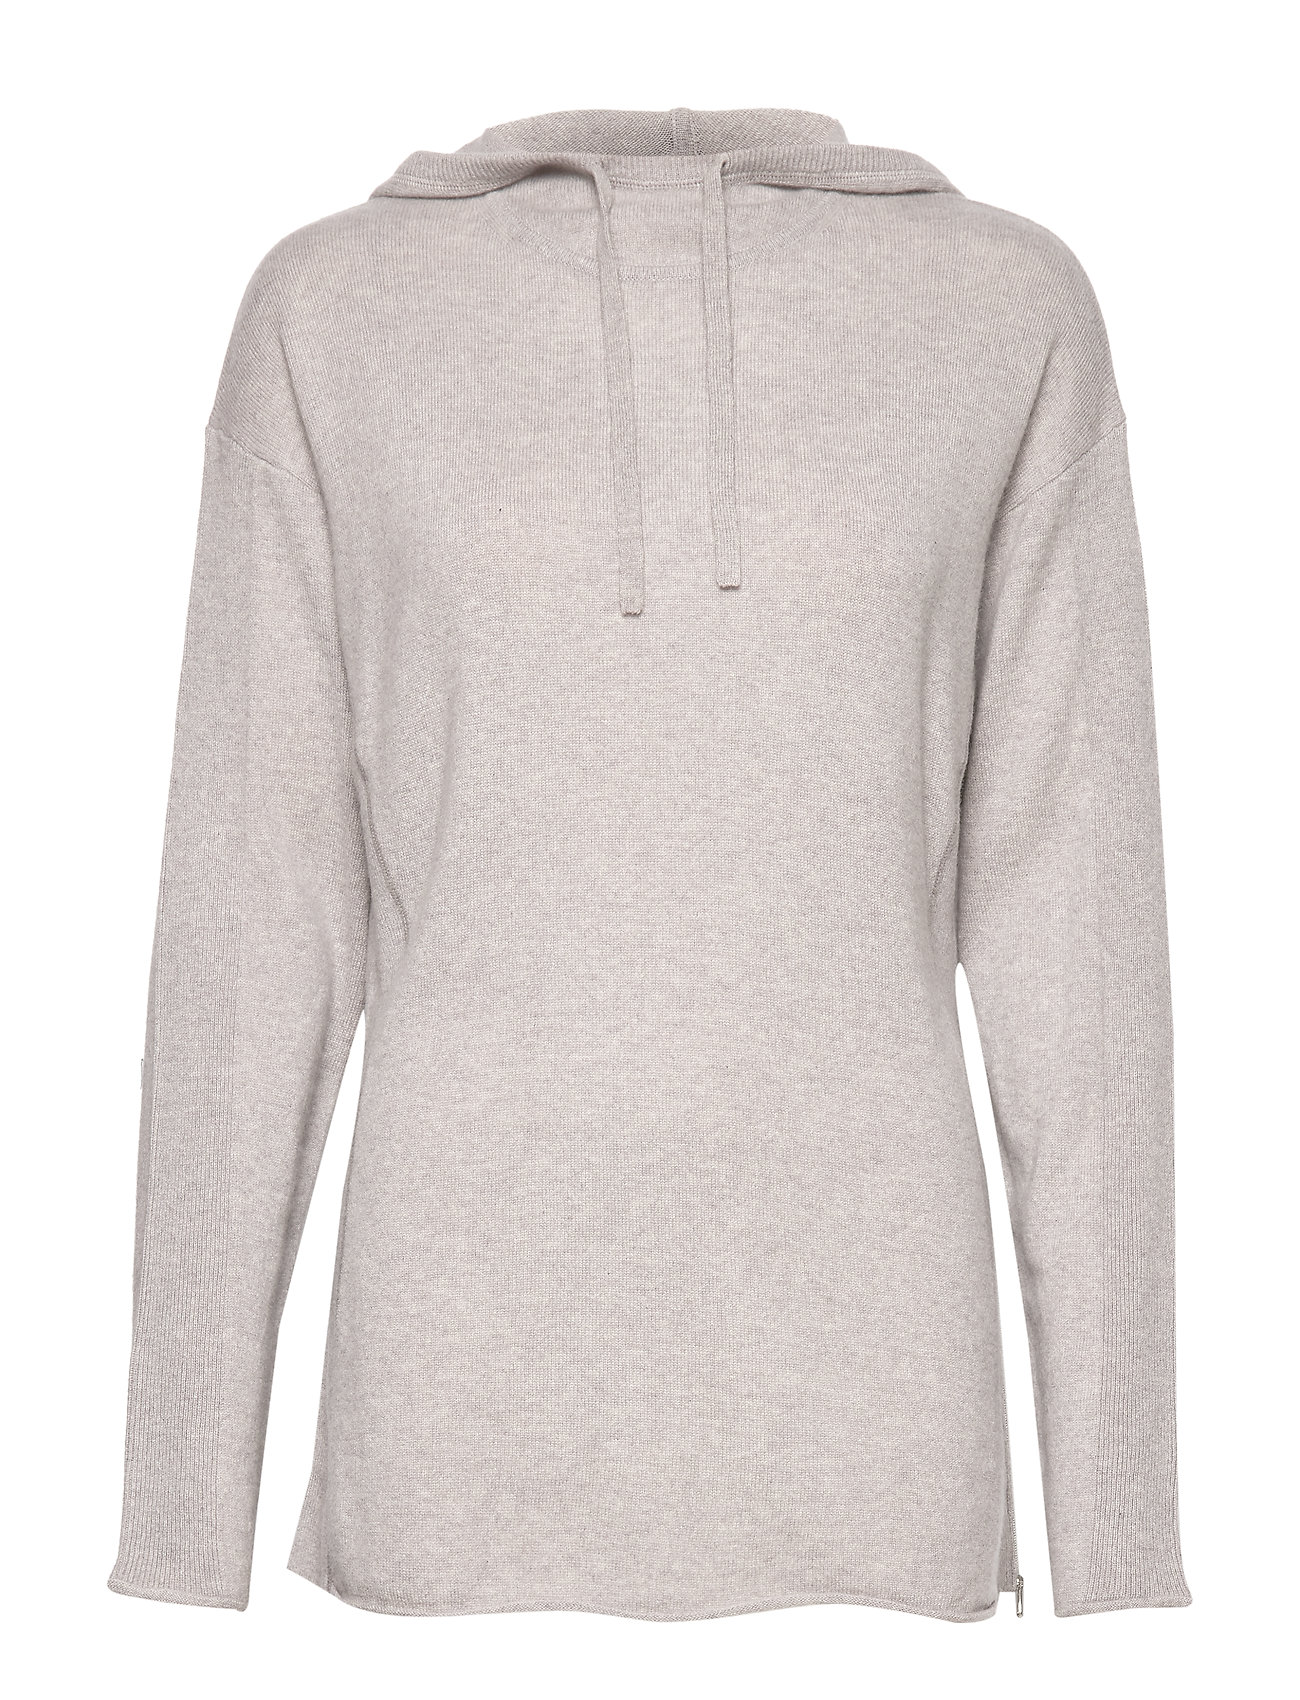 thermoball hoodie womens